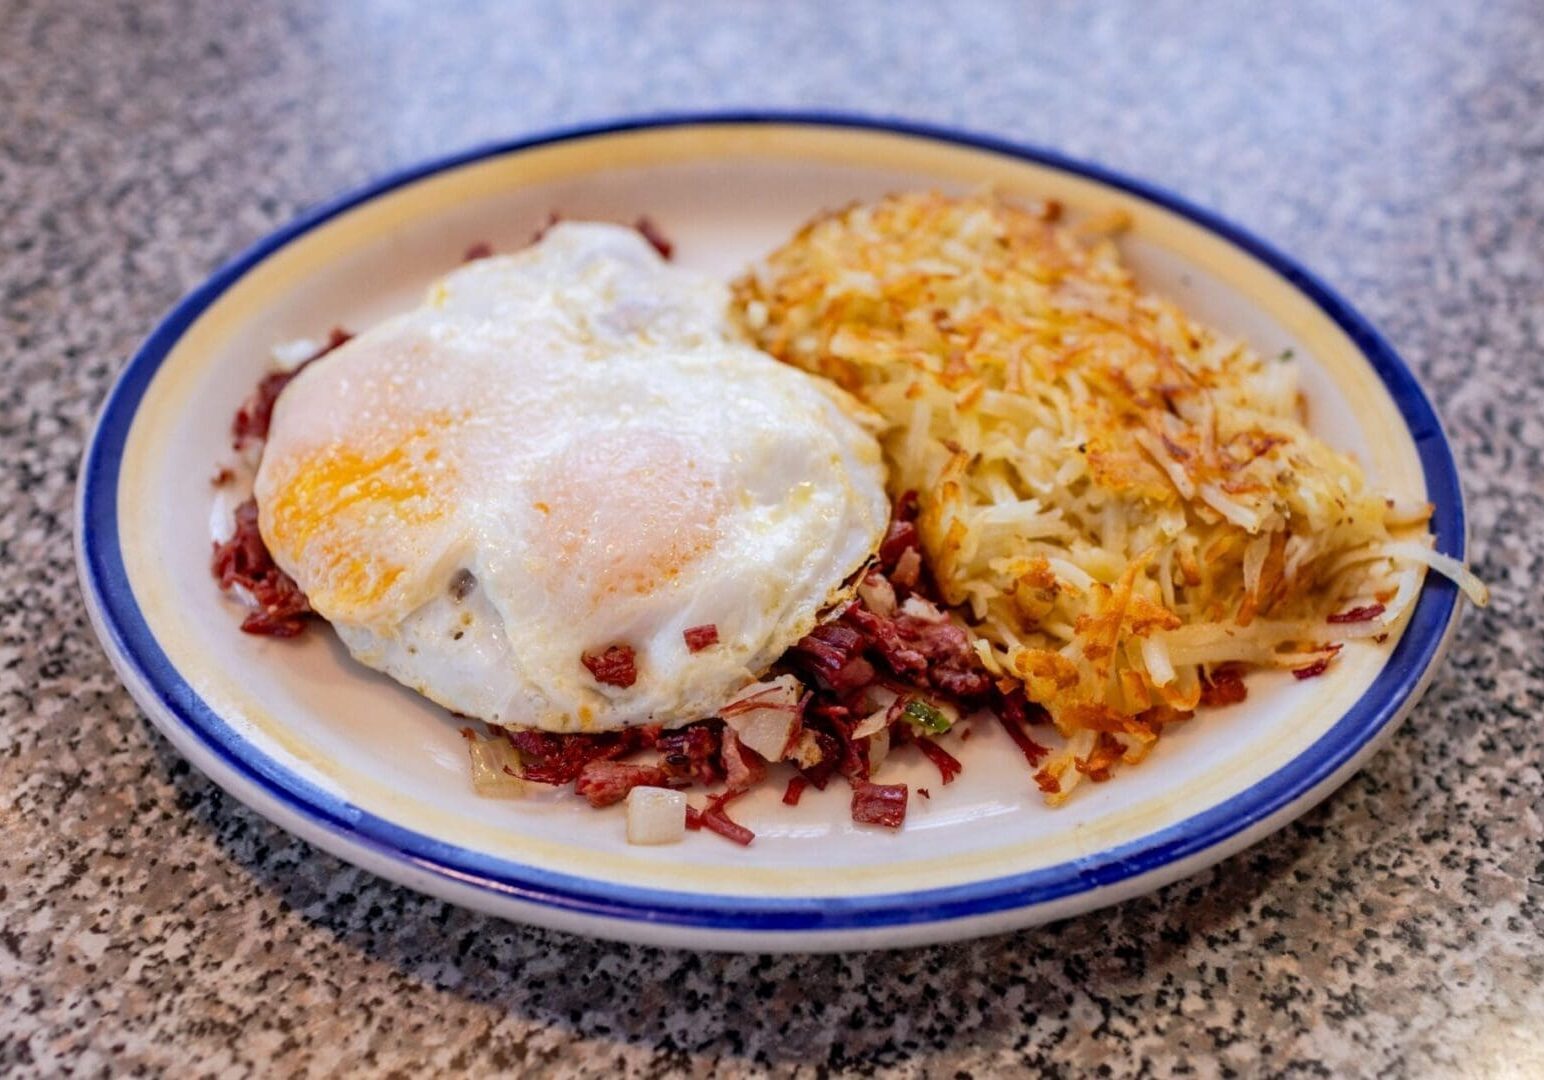 A plate of food with eggs and hash browns.